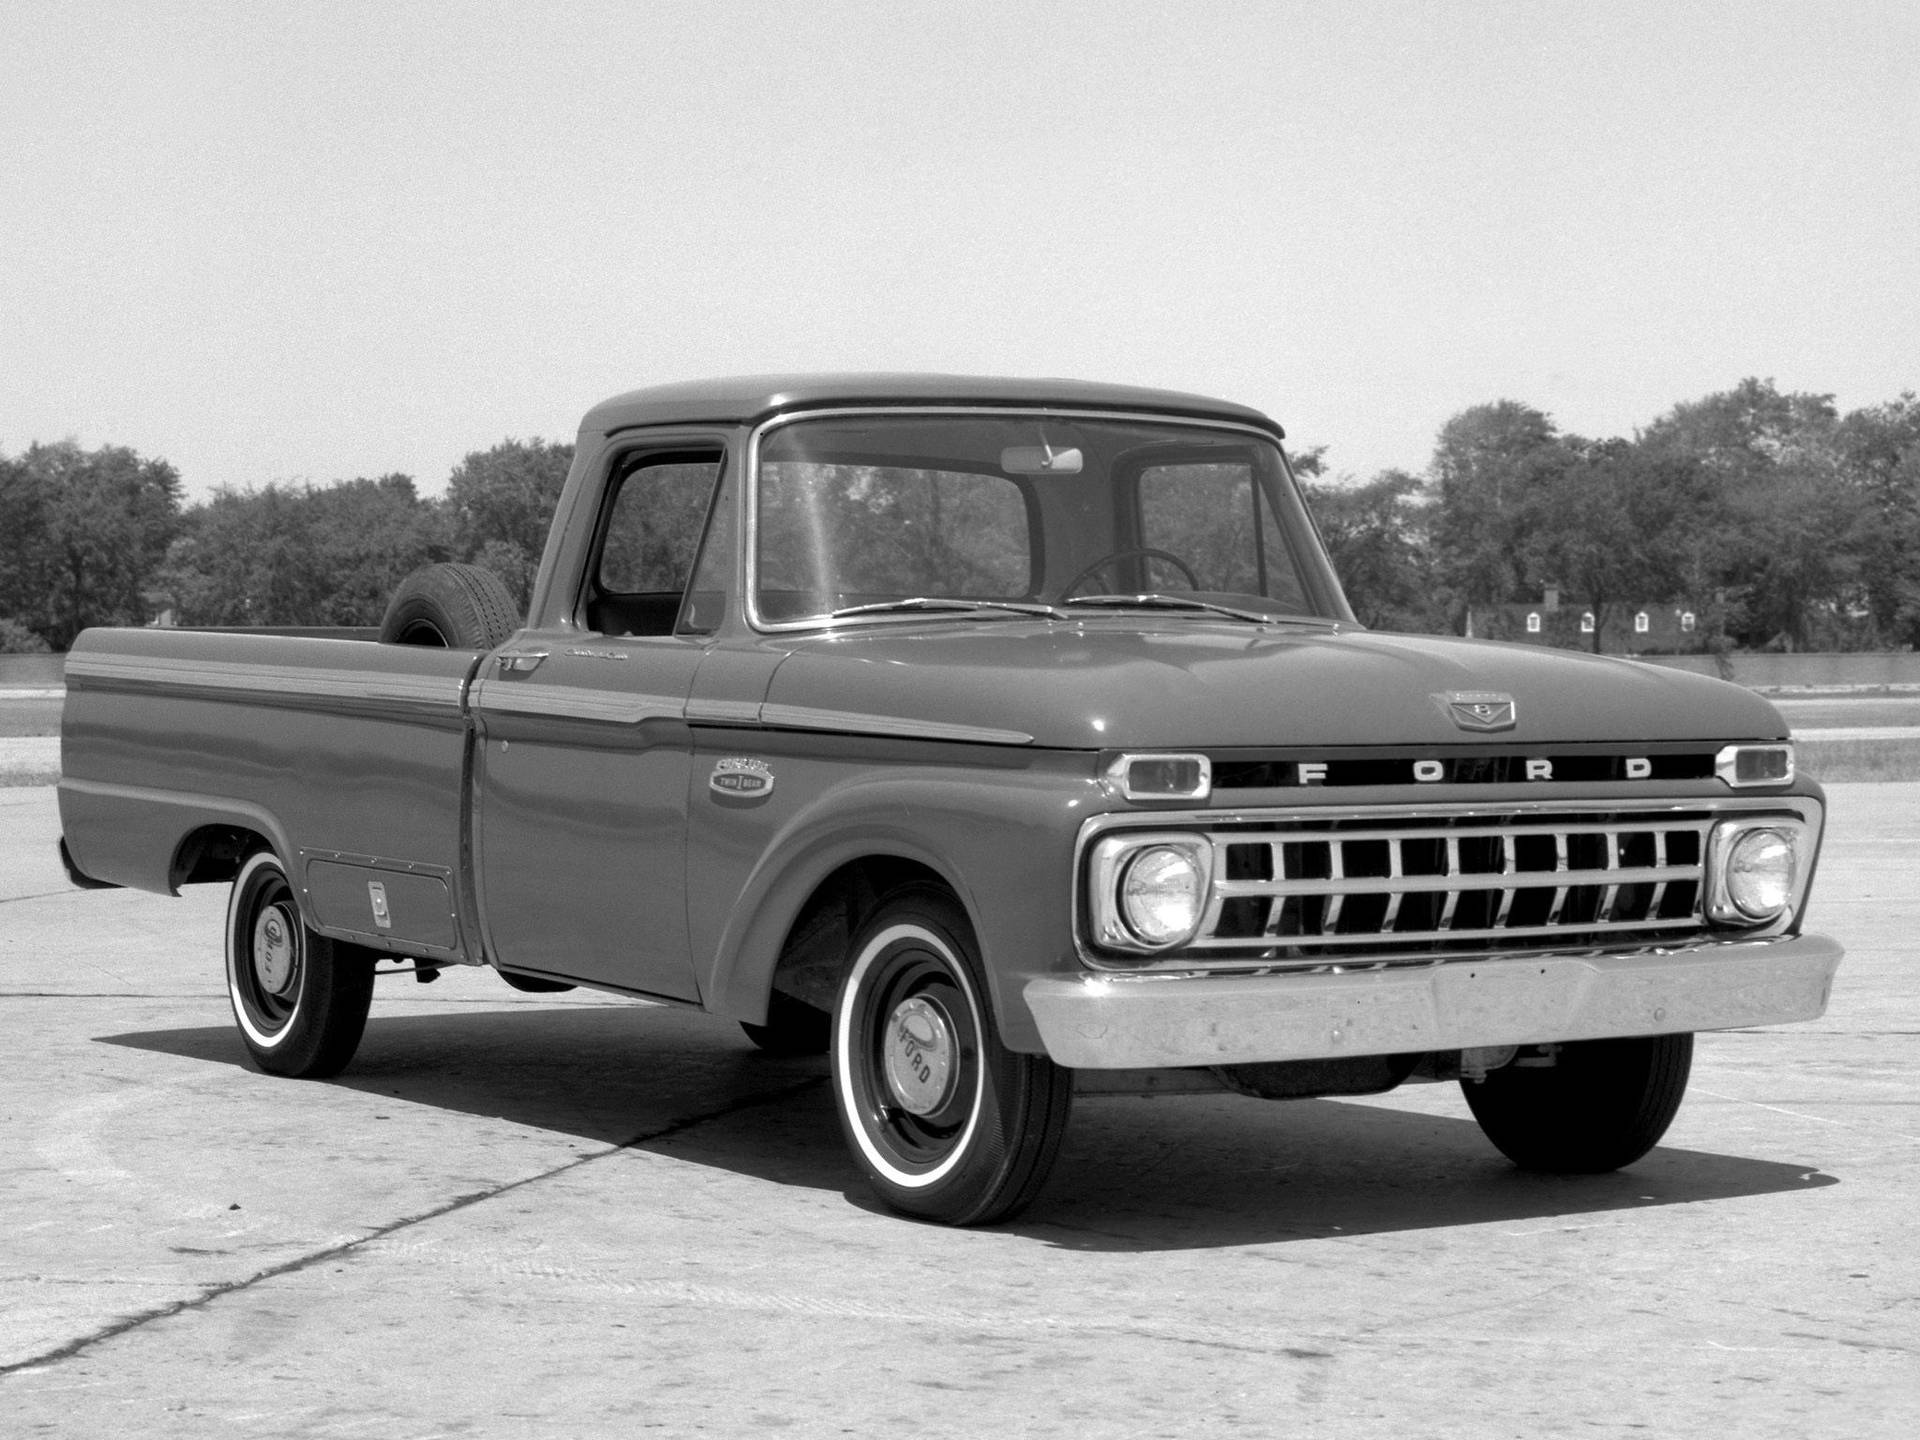 Monochrome Old Ford Truck